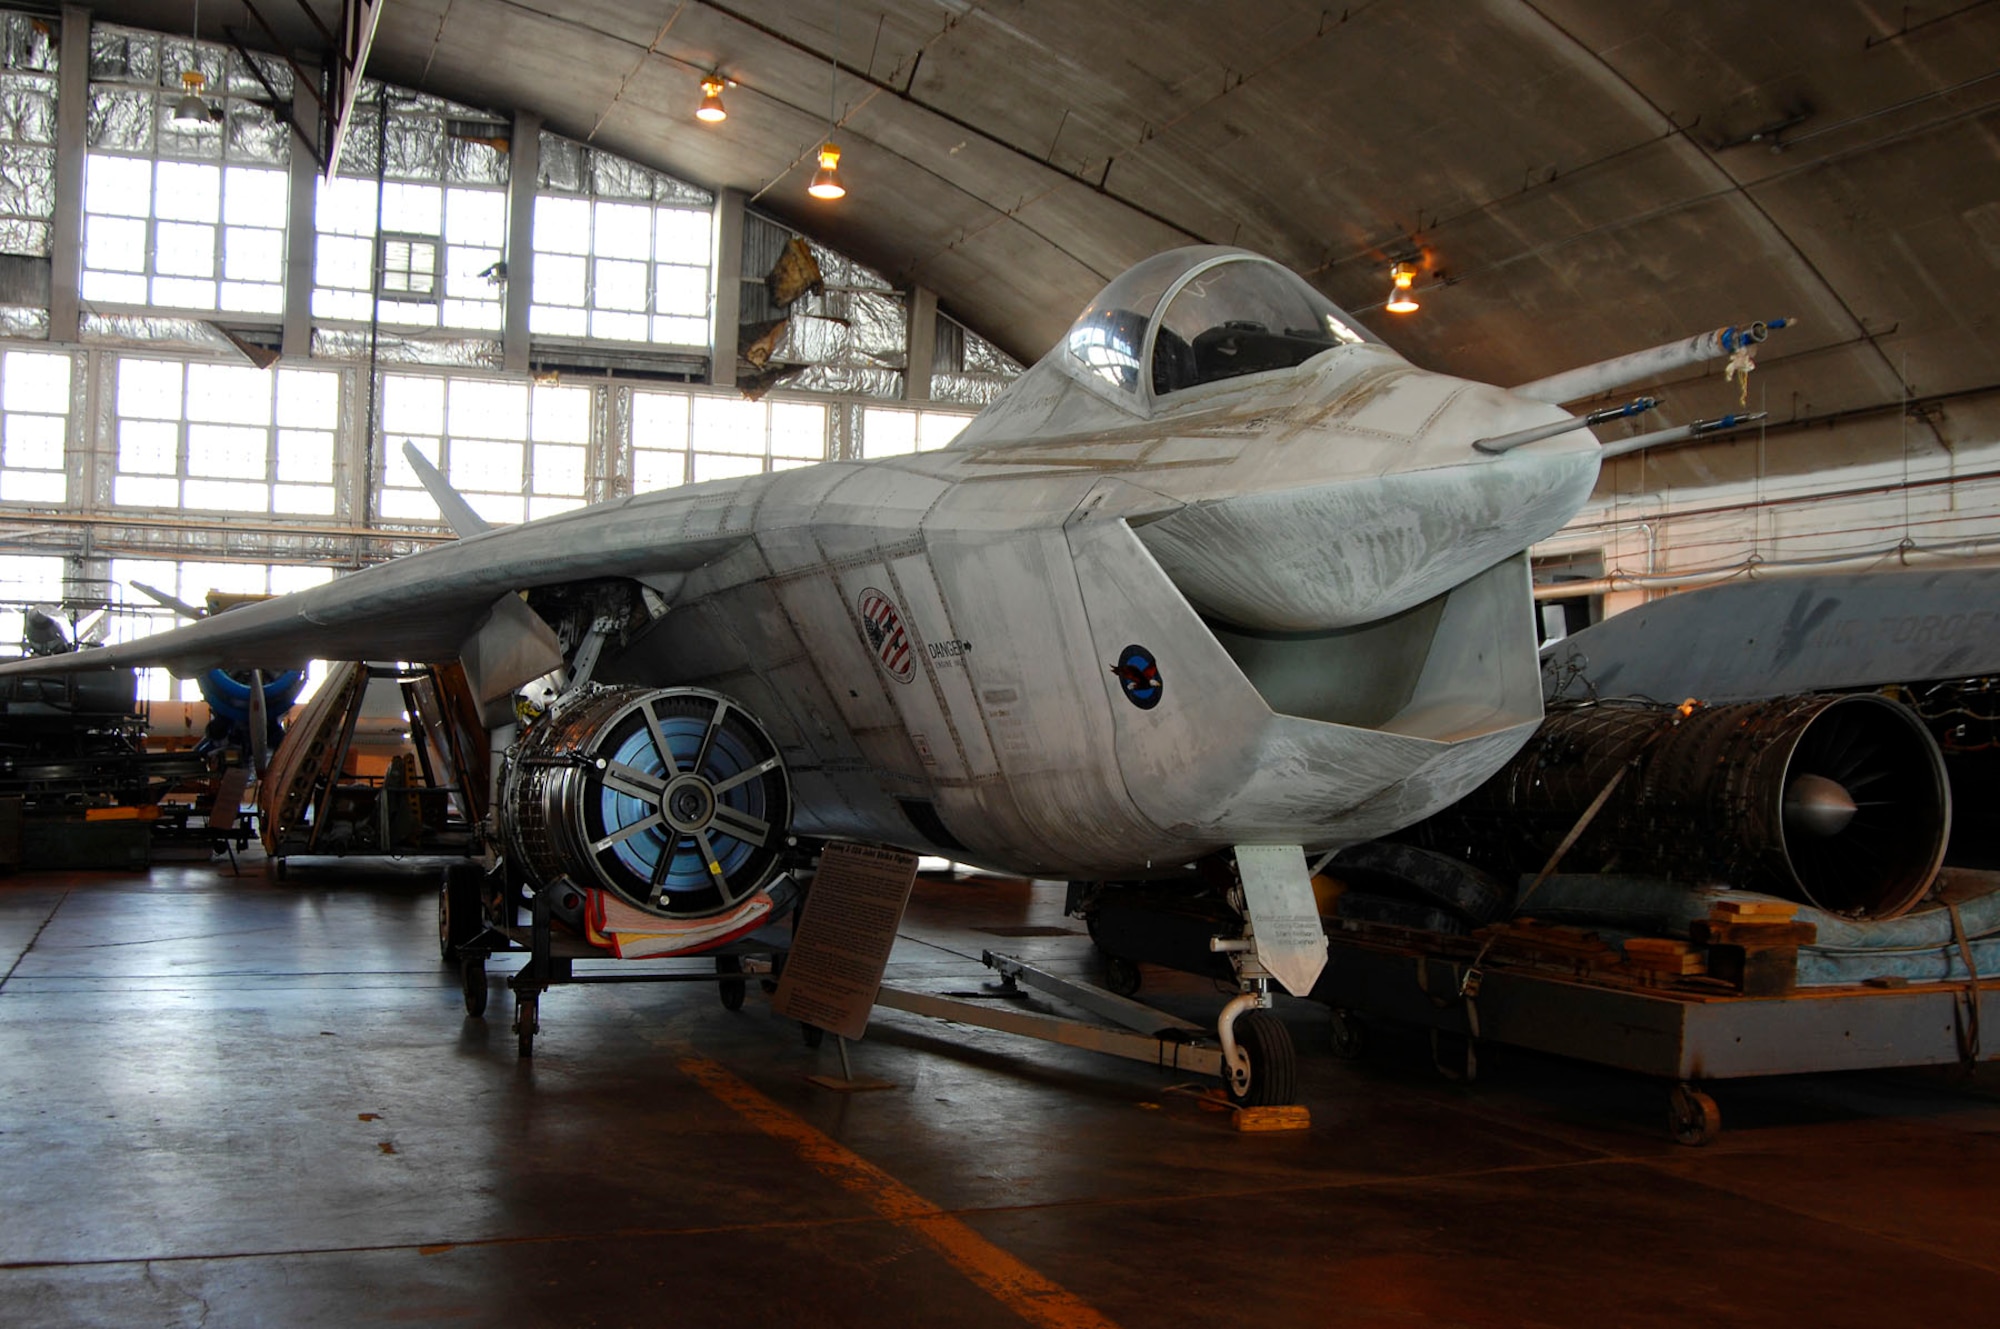 DAYTON, Ohio (02/2007) - The Boeing X-32A in the restoration hangar at the National Museum of the U.S. Air Force. (U.S. Air Force photo by Ben Strasser)